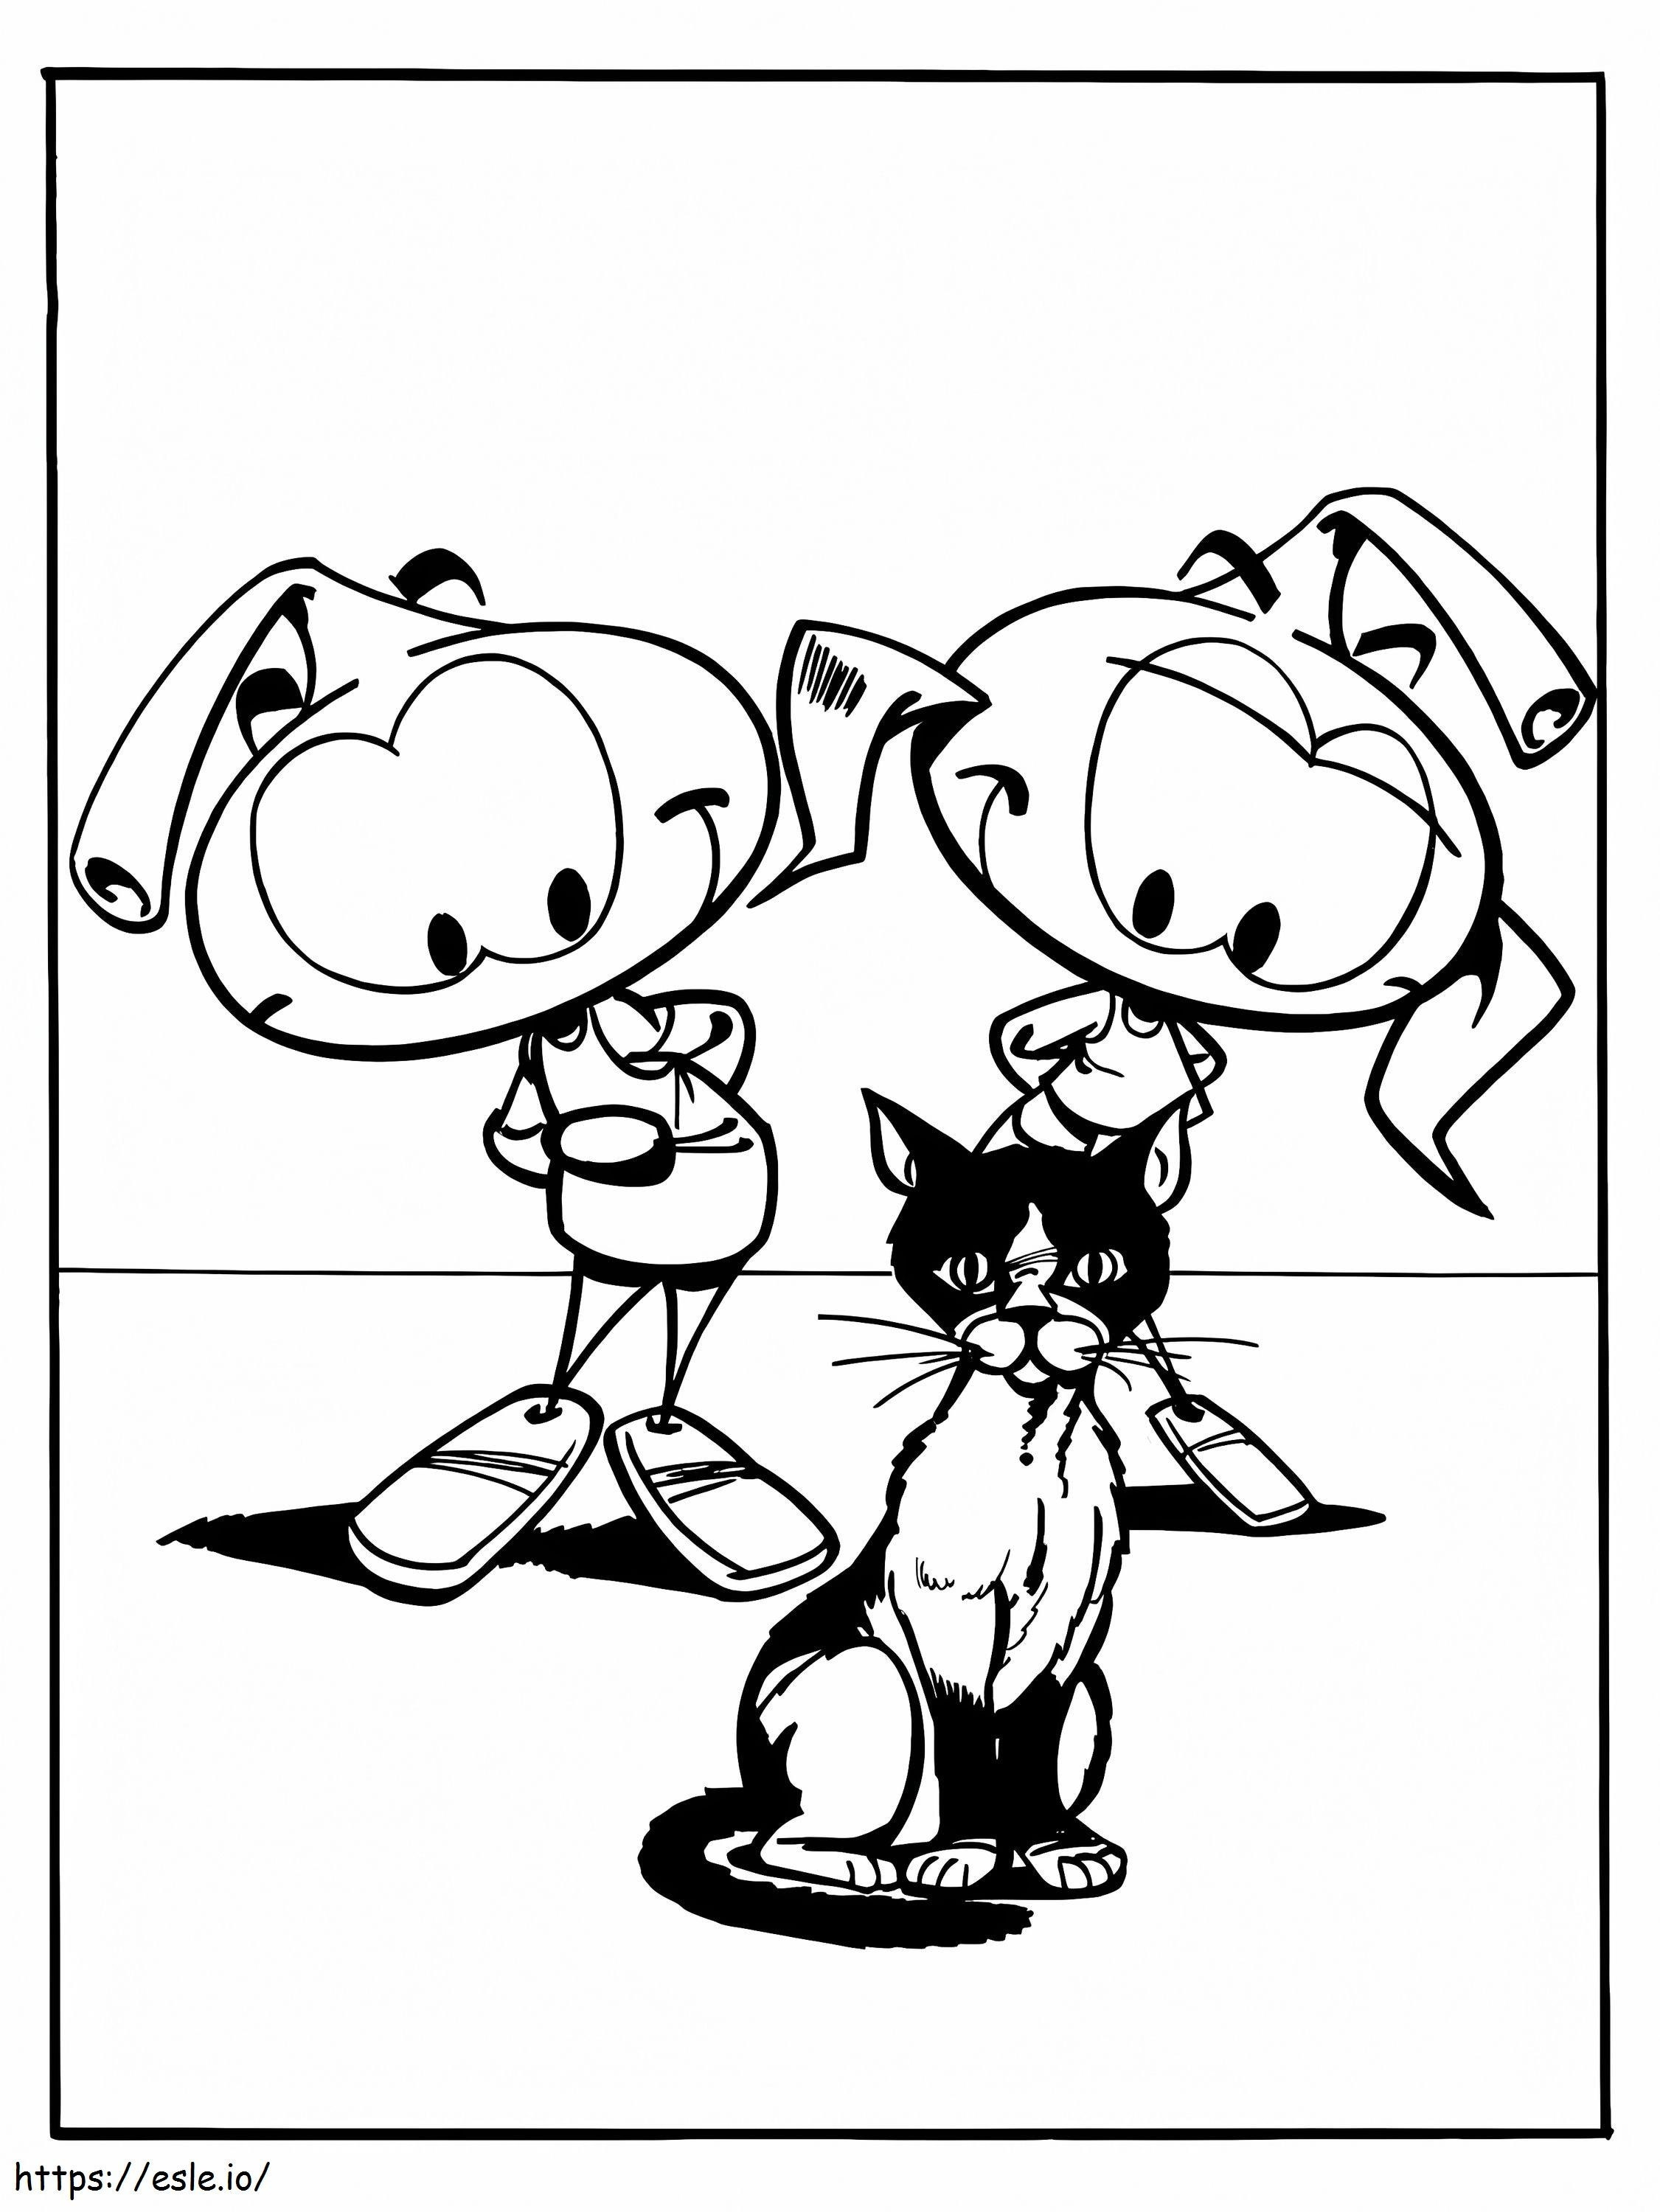 Snorks 4 coloring page